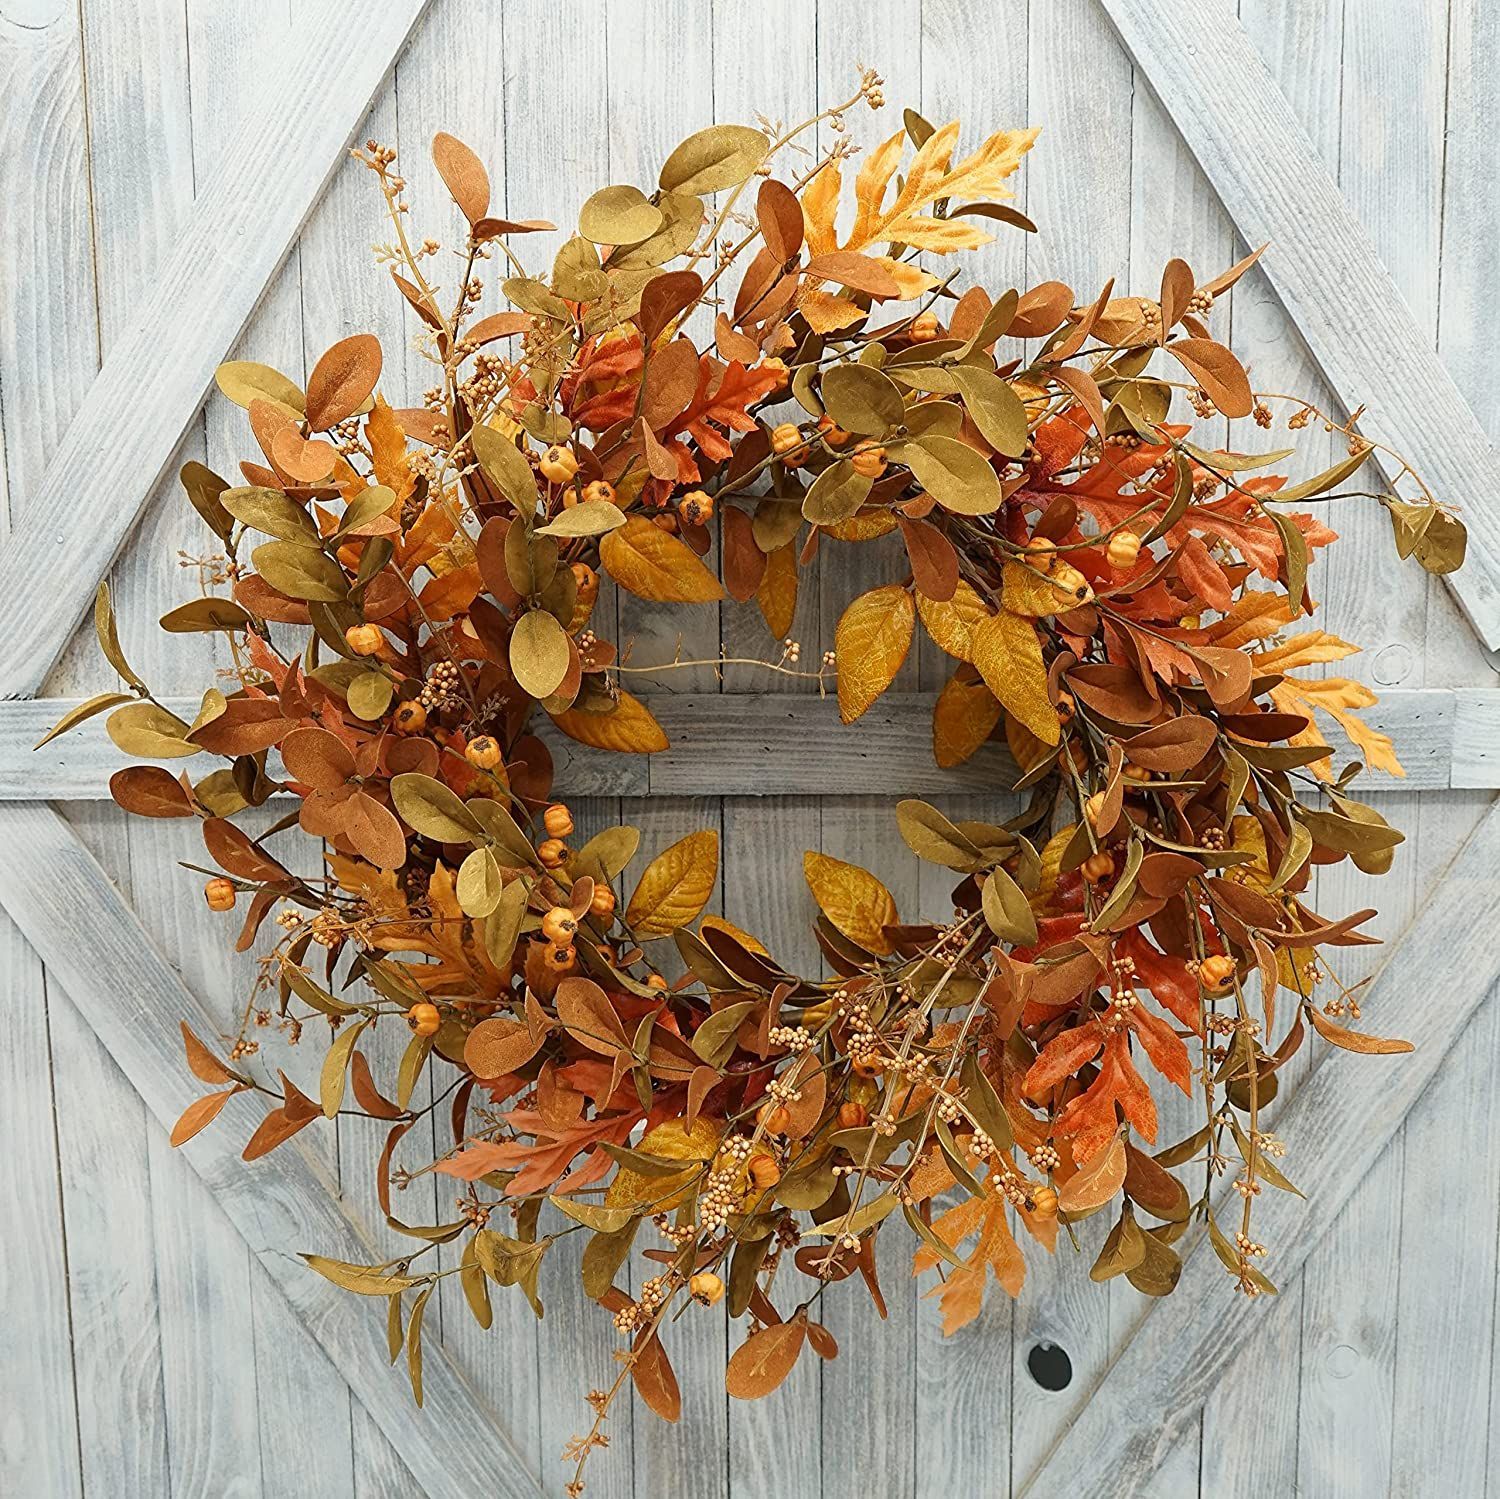 Fall Wreath with Blessed Pumpkin Sign in Gorgeous Blue and Orange Colors